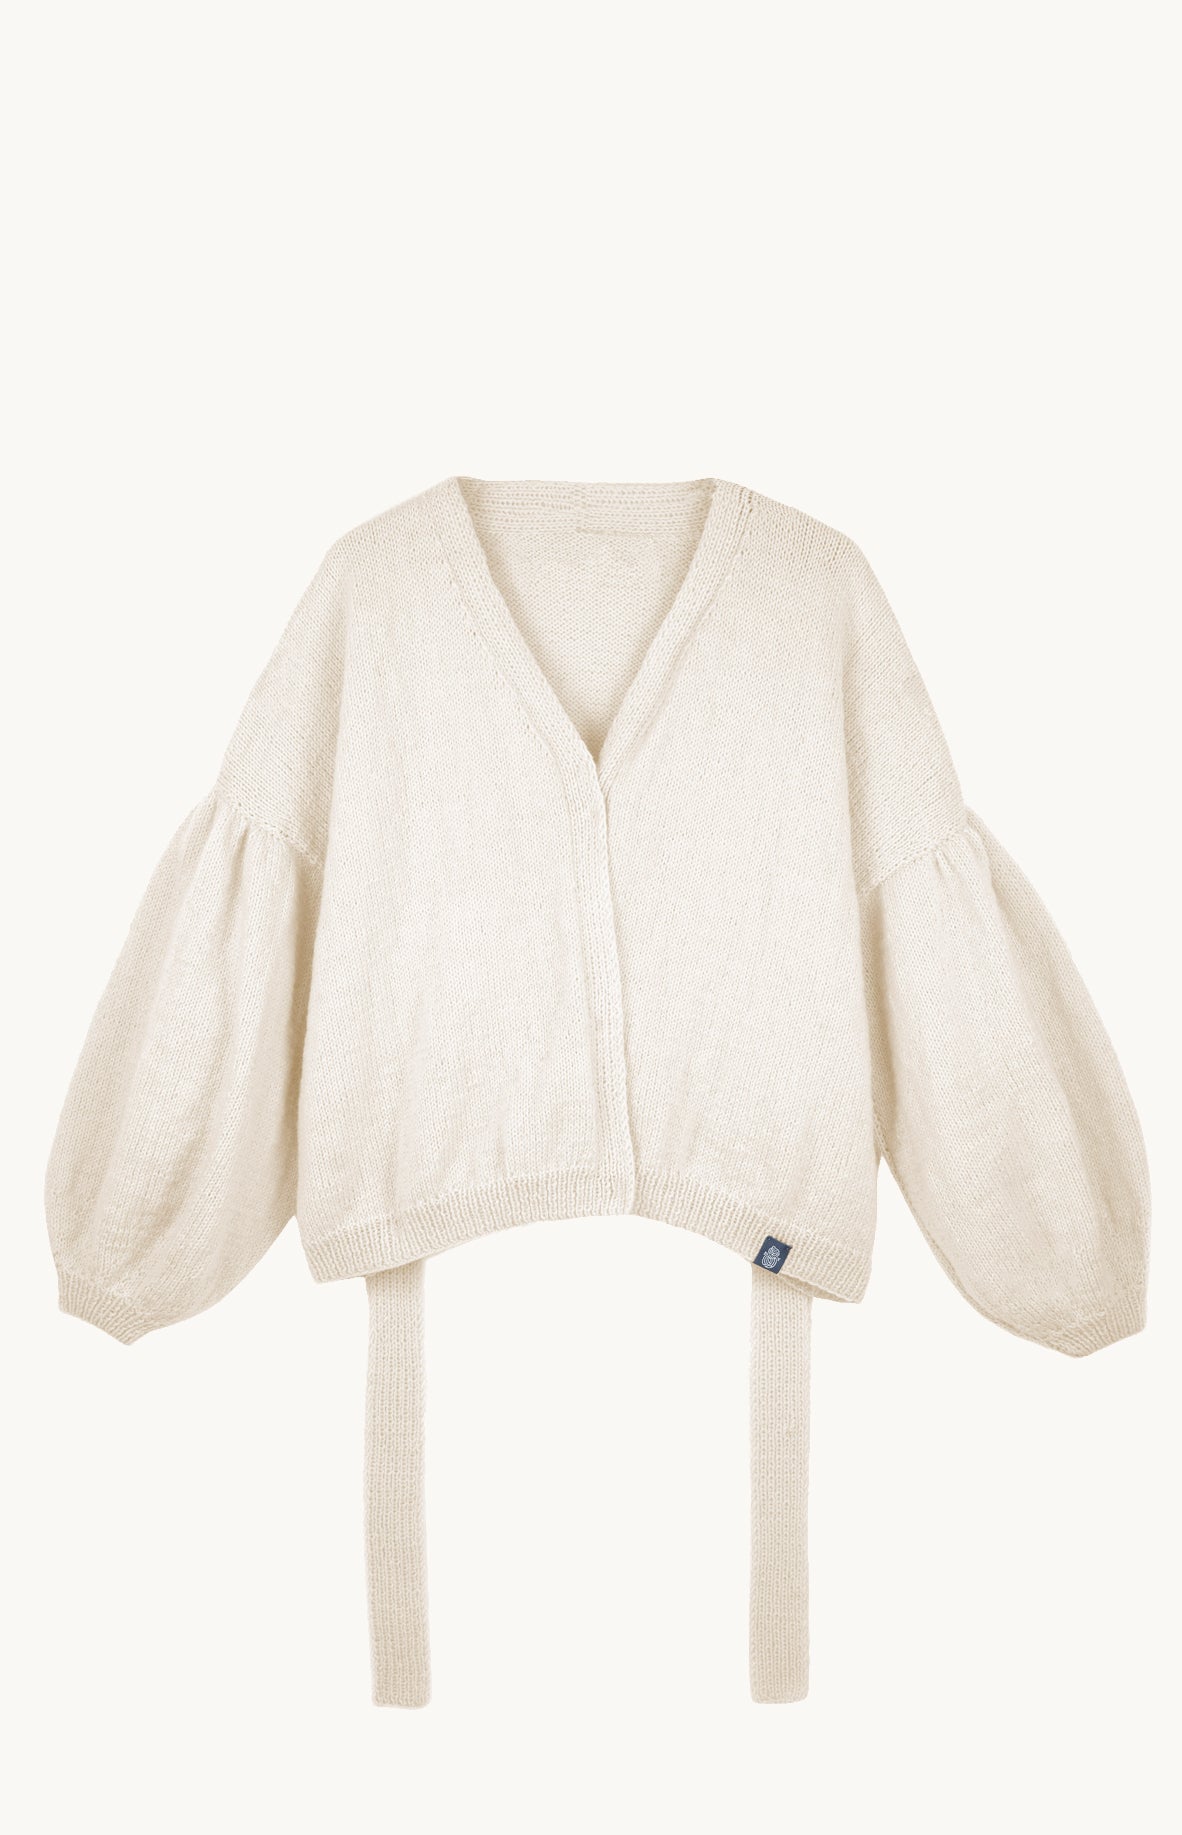 Puffy Knotted Cardigan